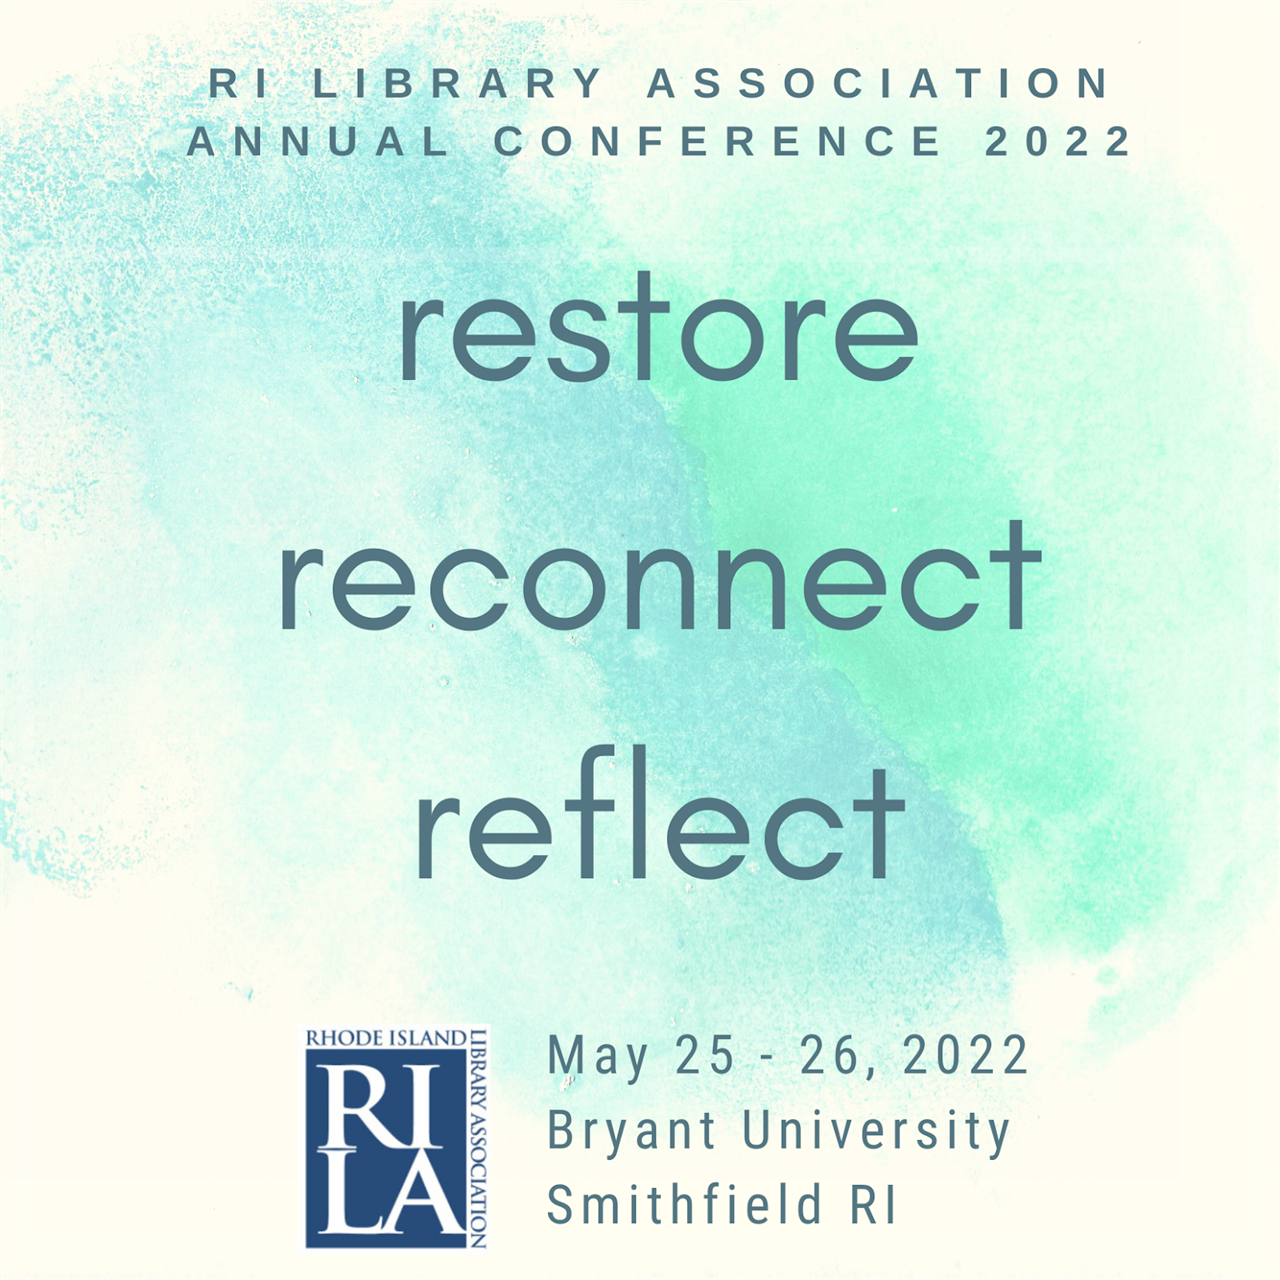 RILA 2022 Annual Conference. The theme is "restore, reconnect, reflect." Conference is May 25-26, 2022, at Bryant University in Smithfield, RI.